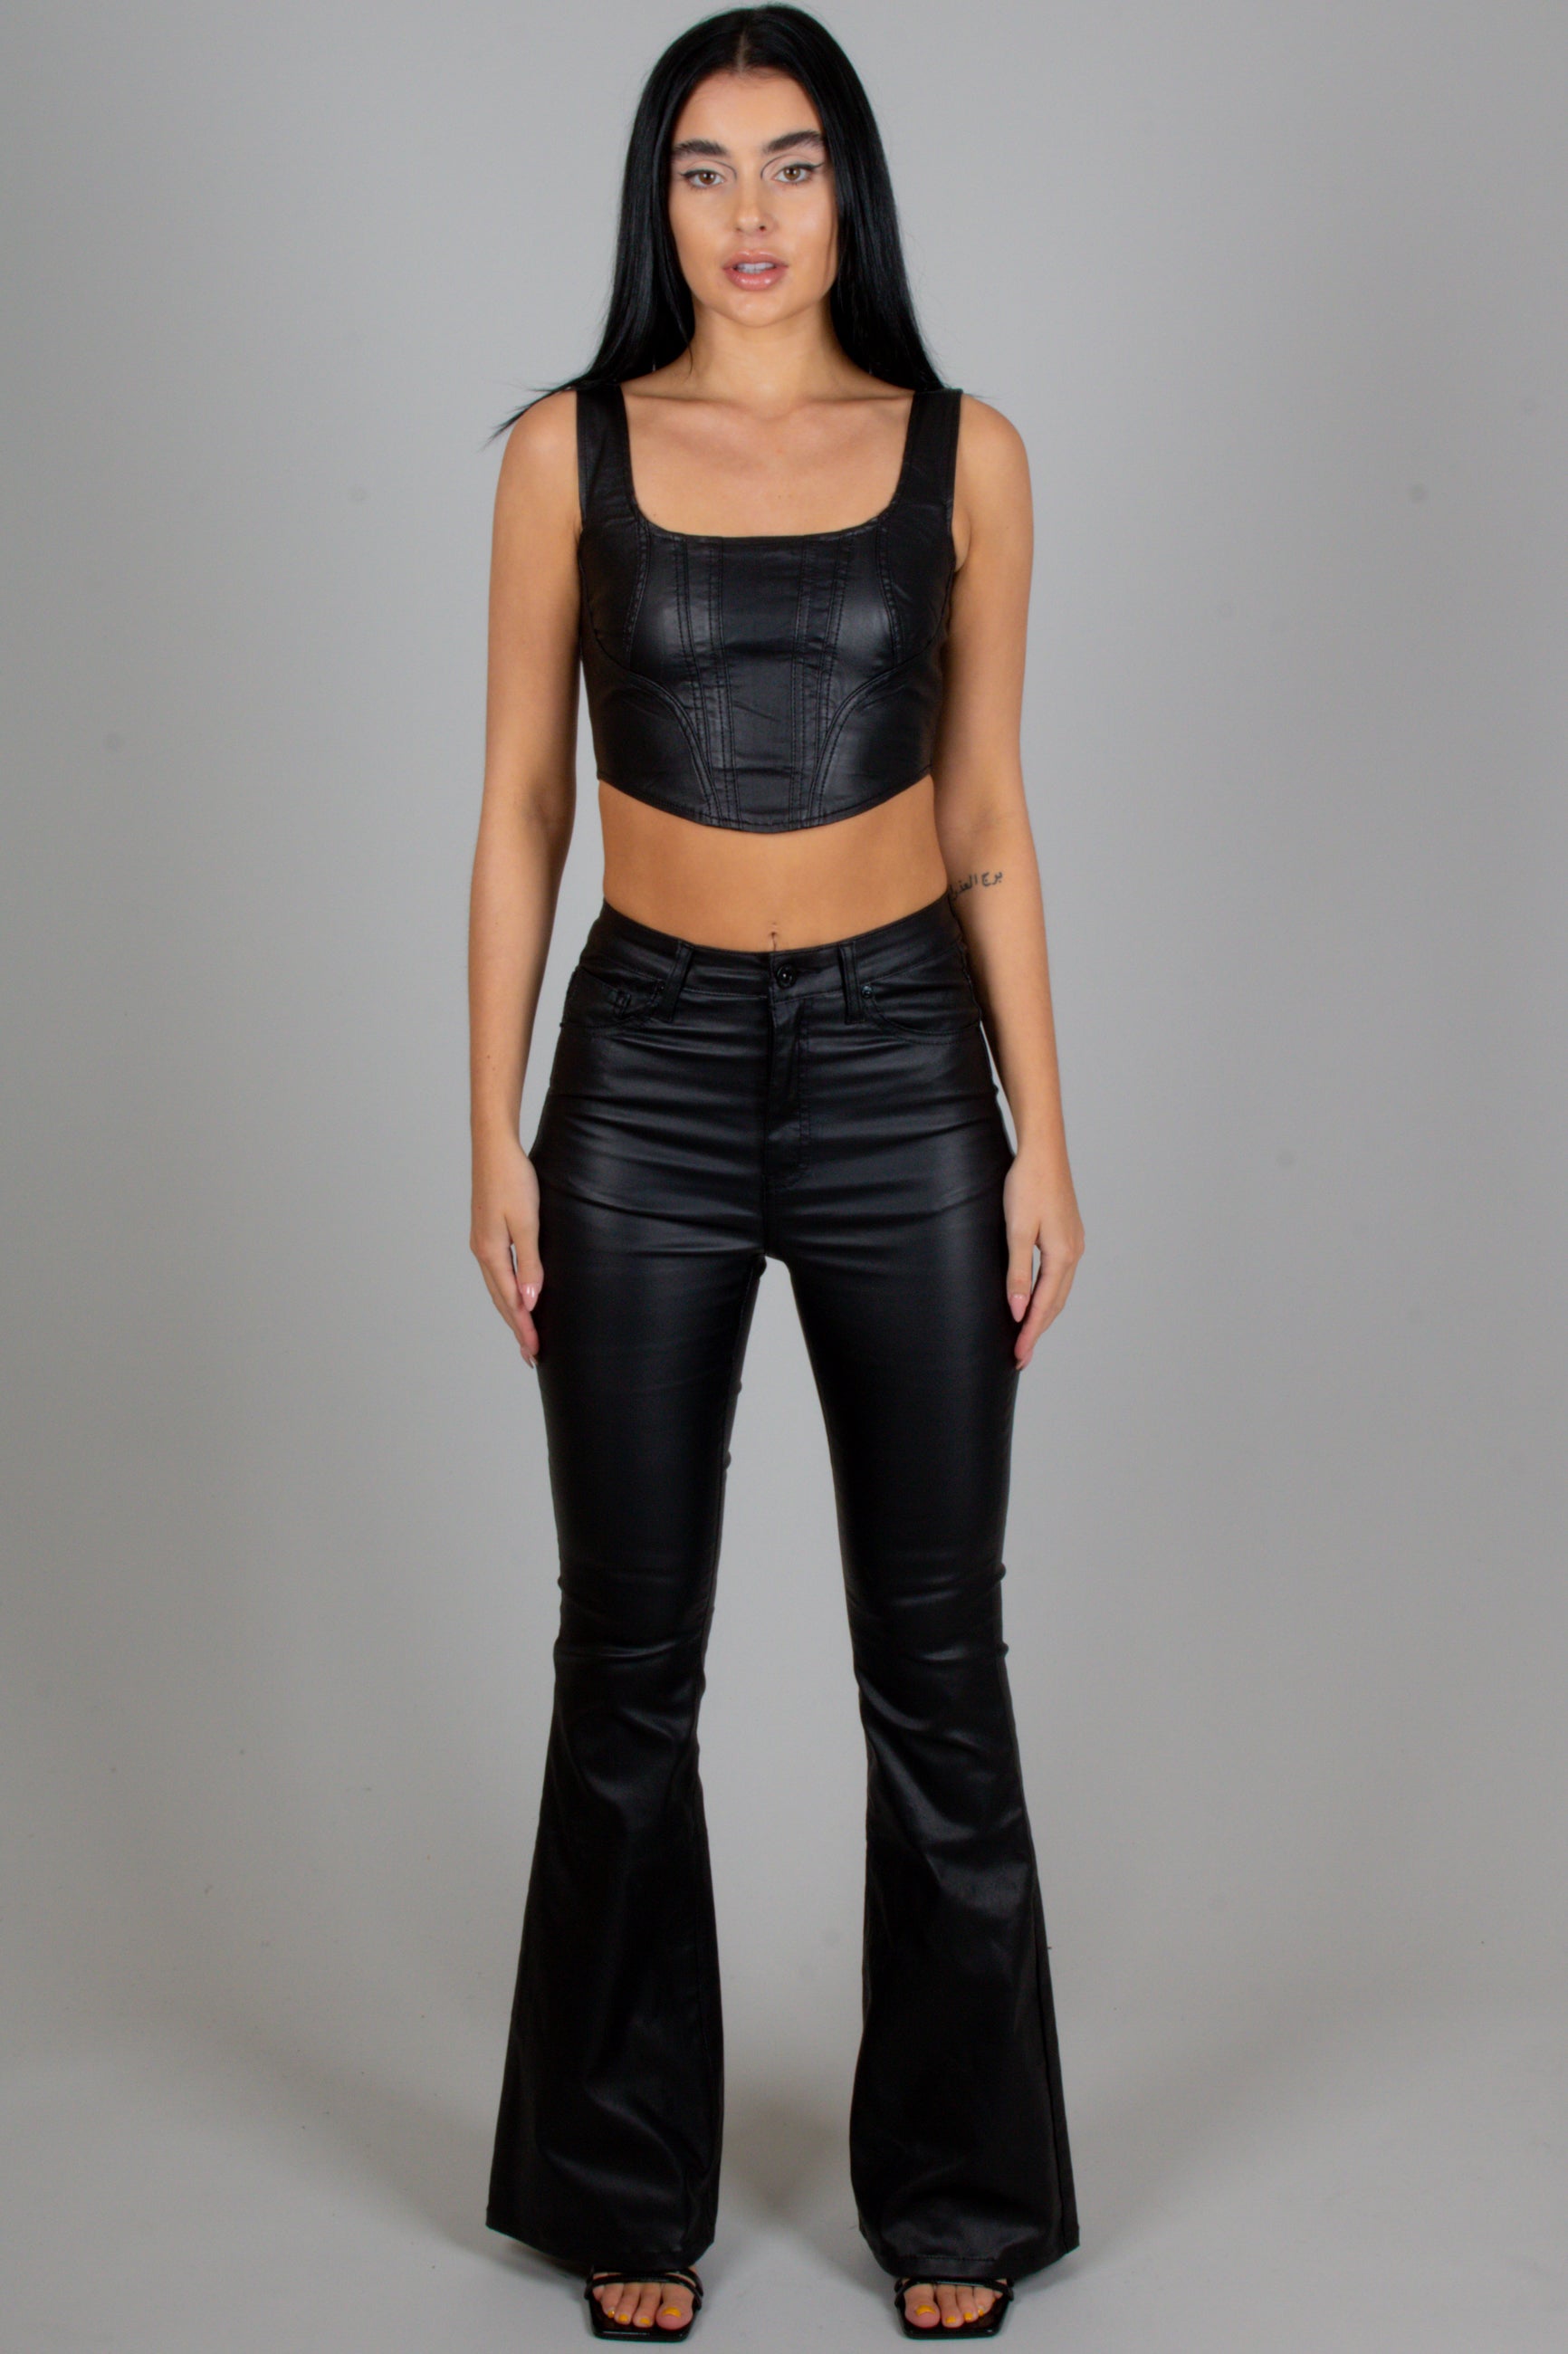 FAE Black Faux Leather Flair Trousers